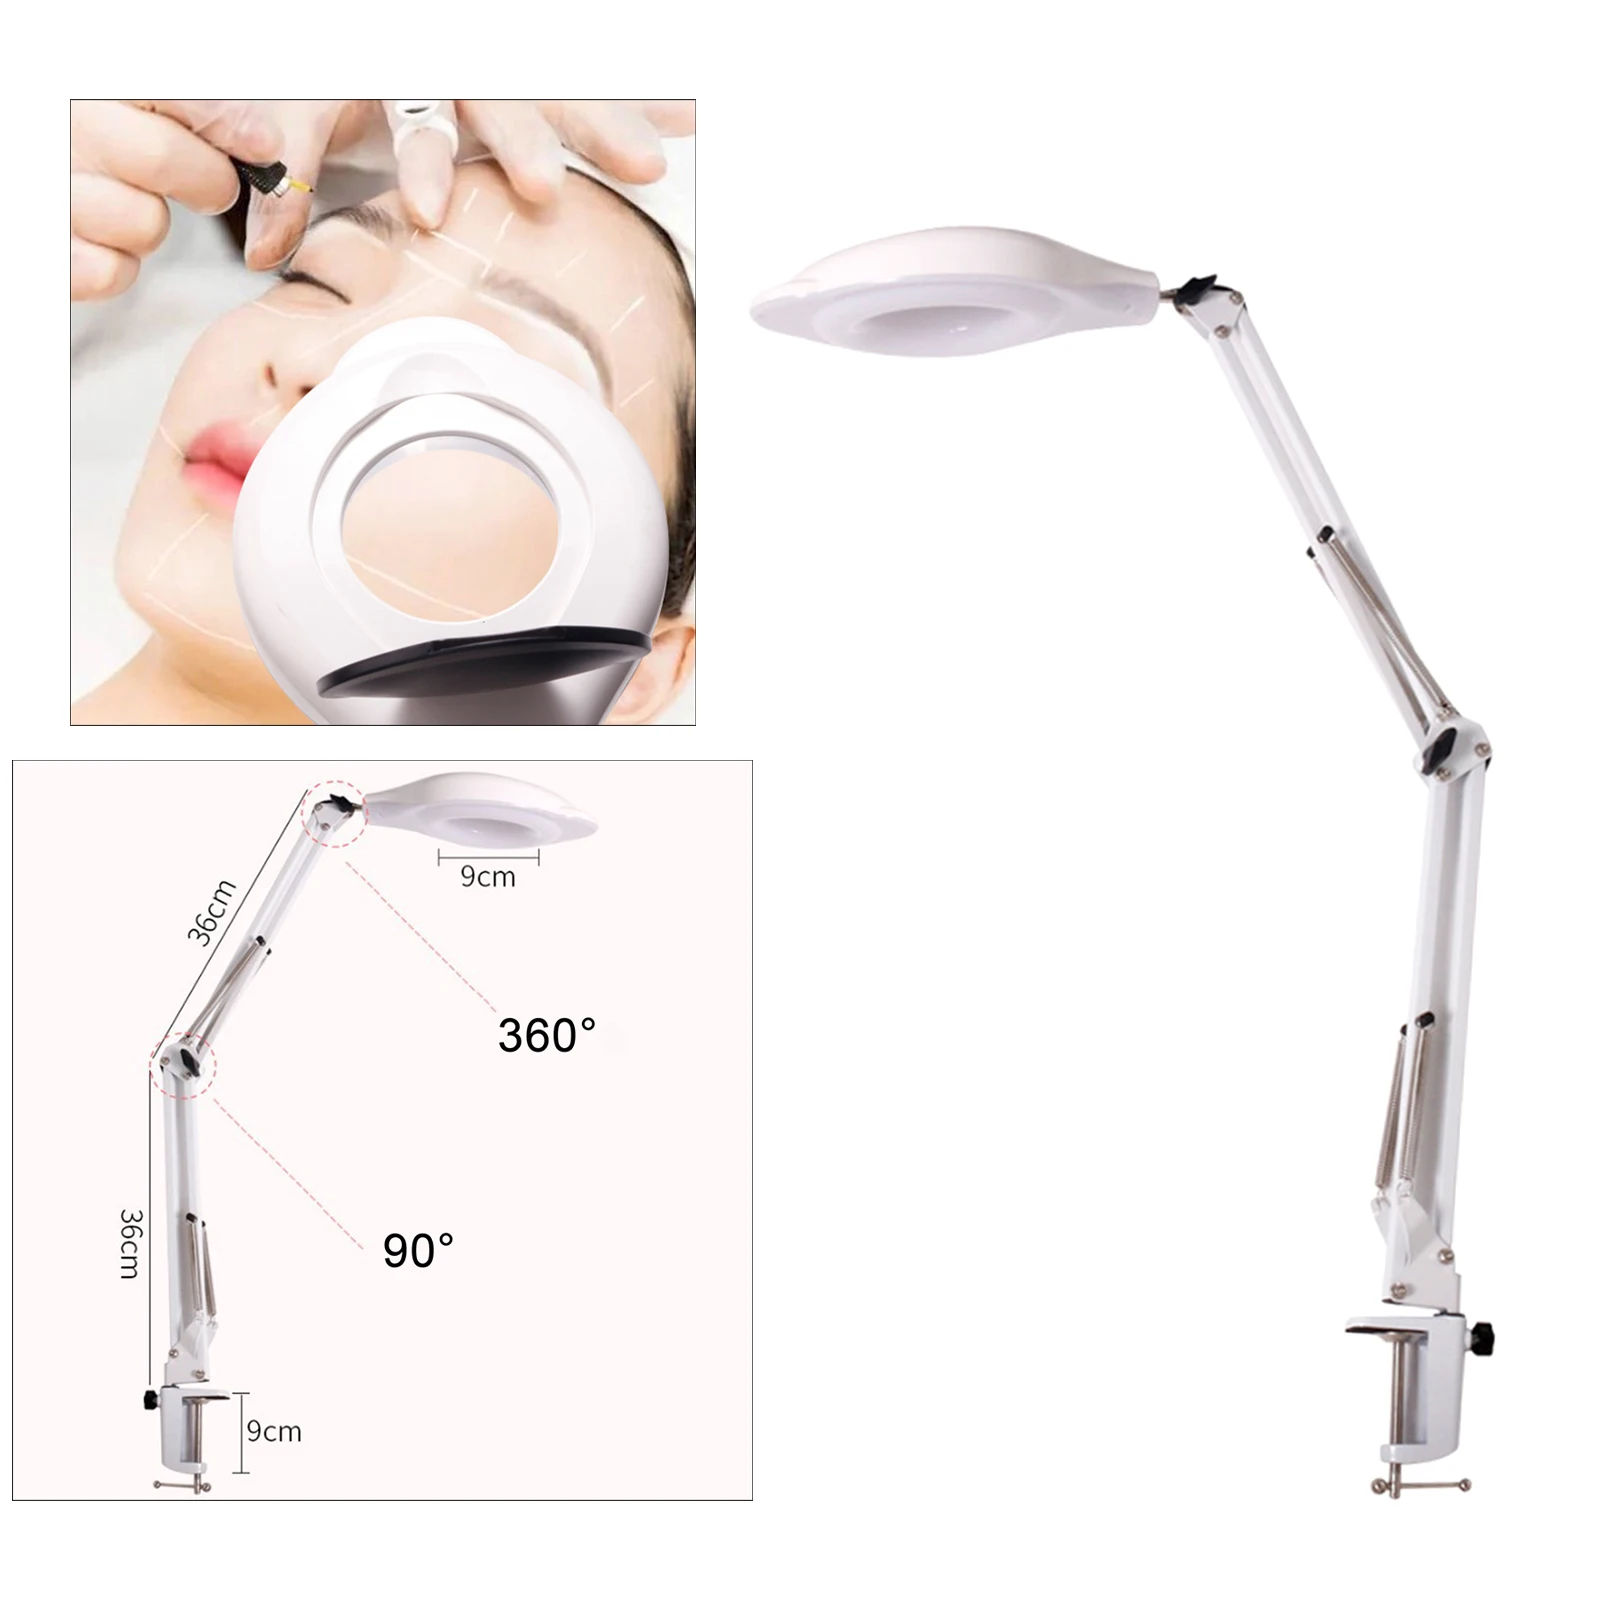 Folding USB Magnifying Lamp Magnifier Table Light with Clamp, 6,000k Cool White Led Technology